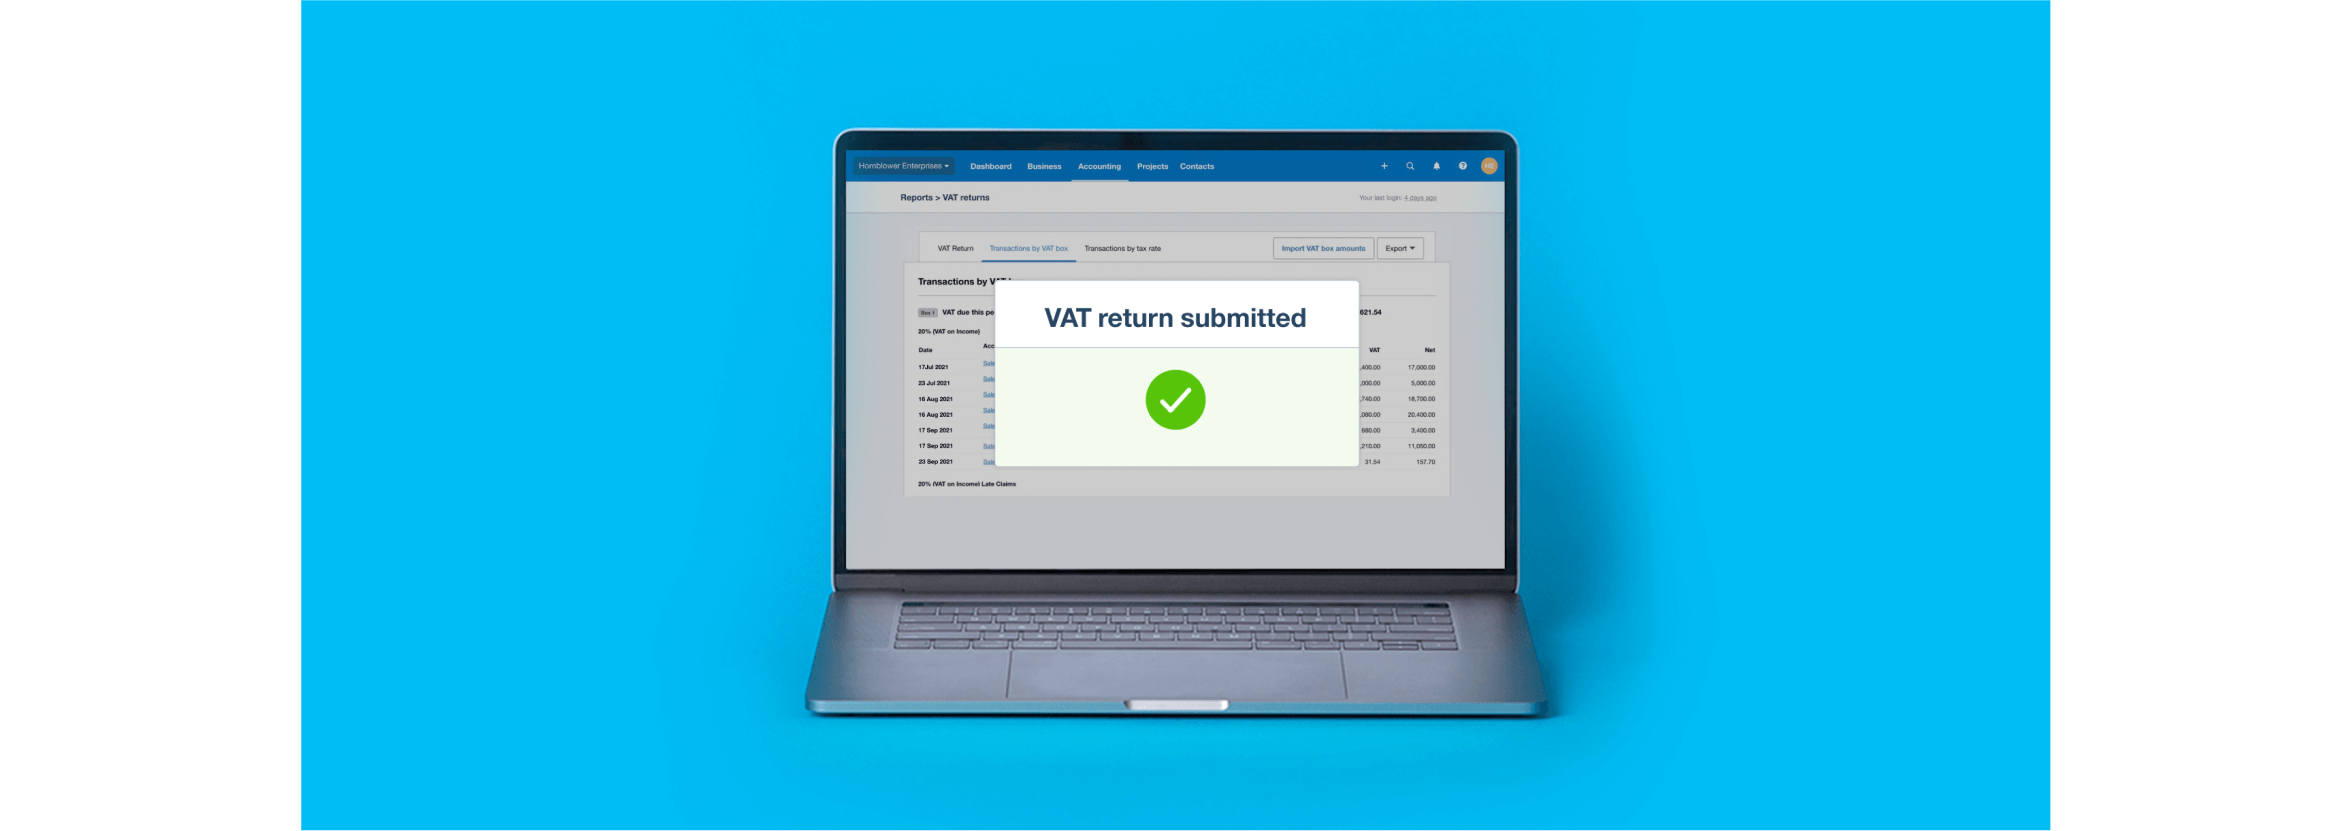 The VAT return screen on a laptop shows a message confirming that a VAT return has  been  submitted to HMRC.